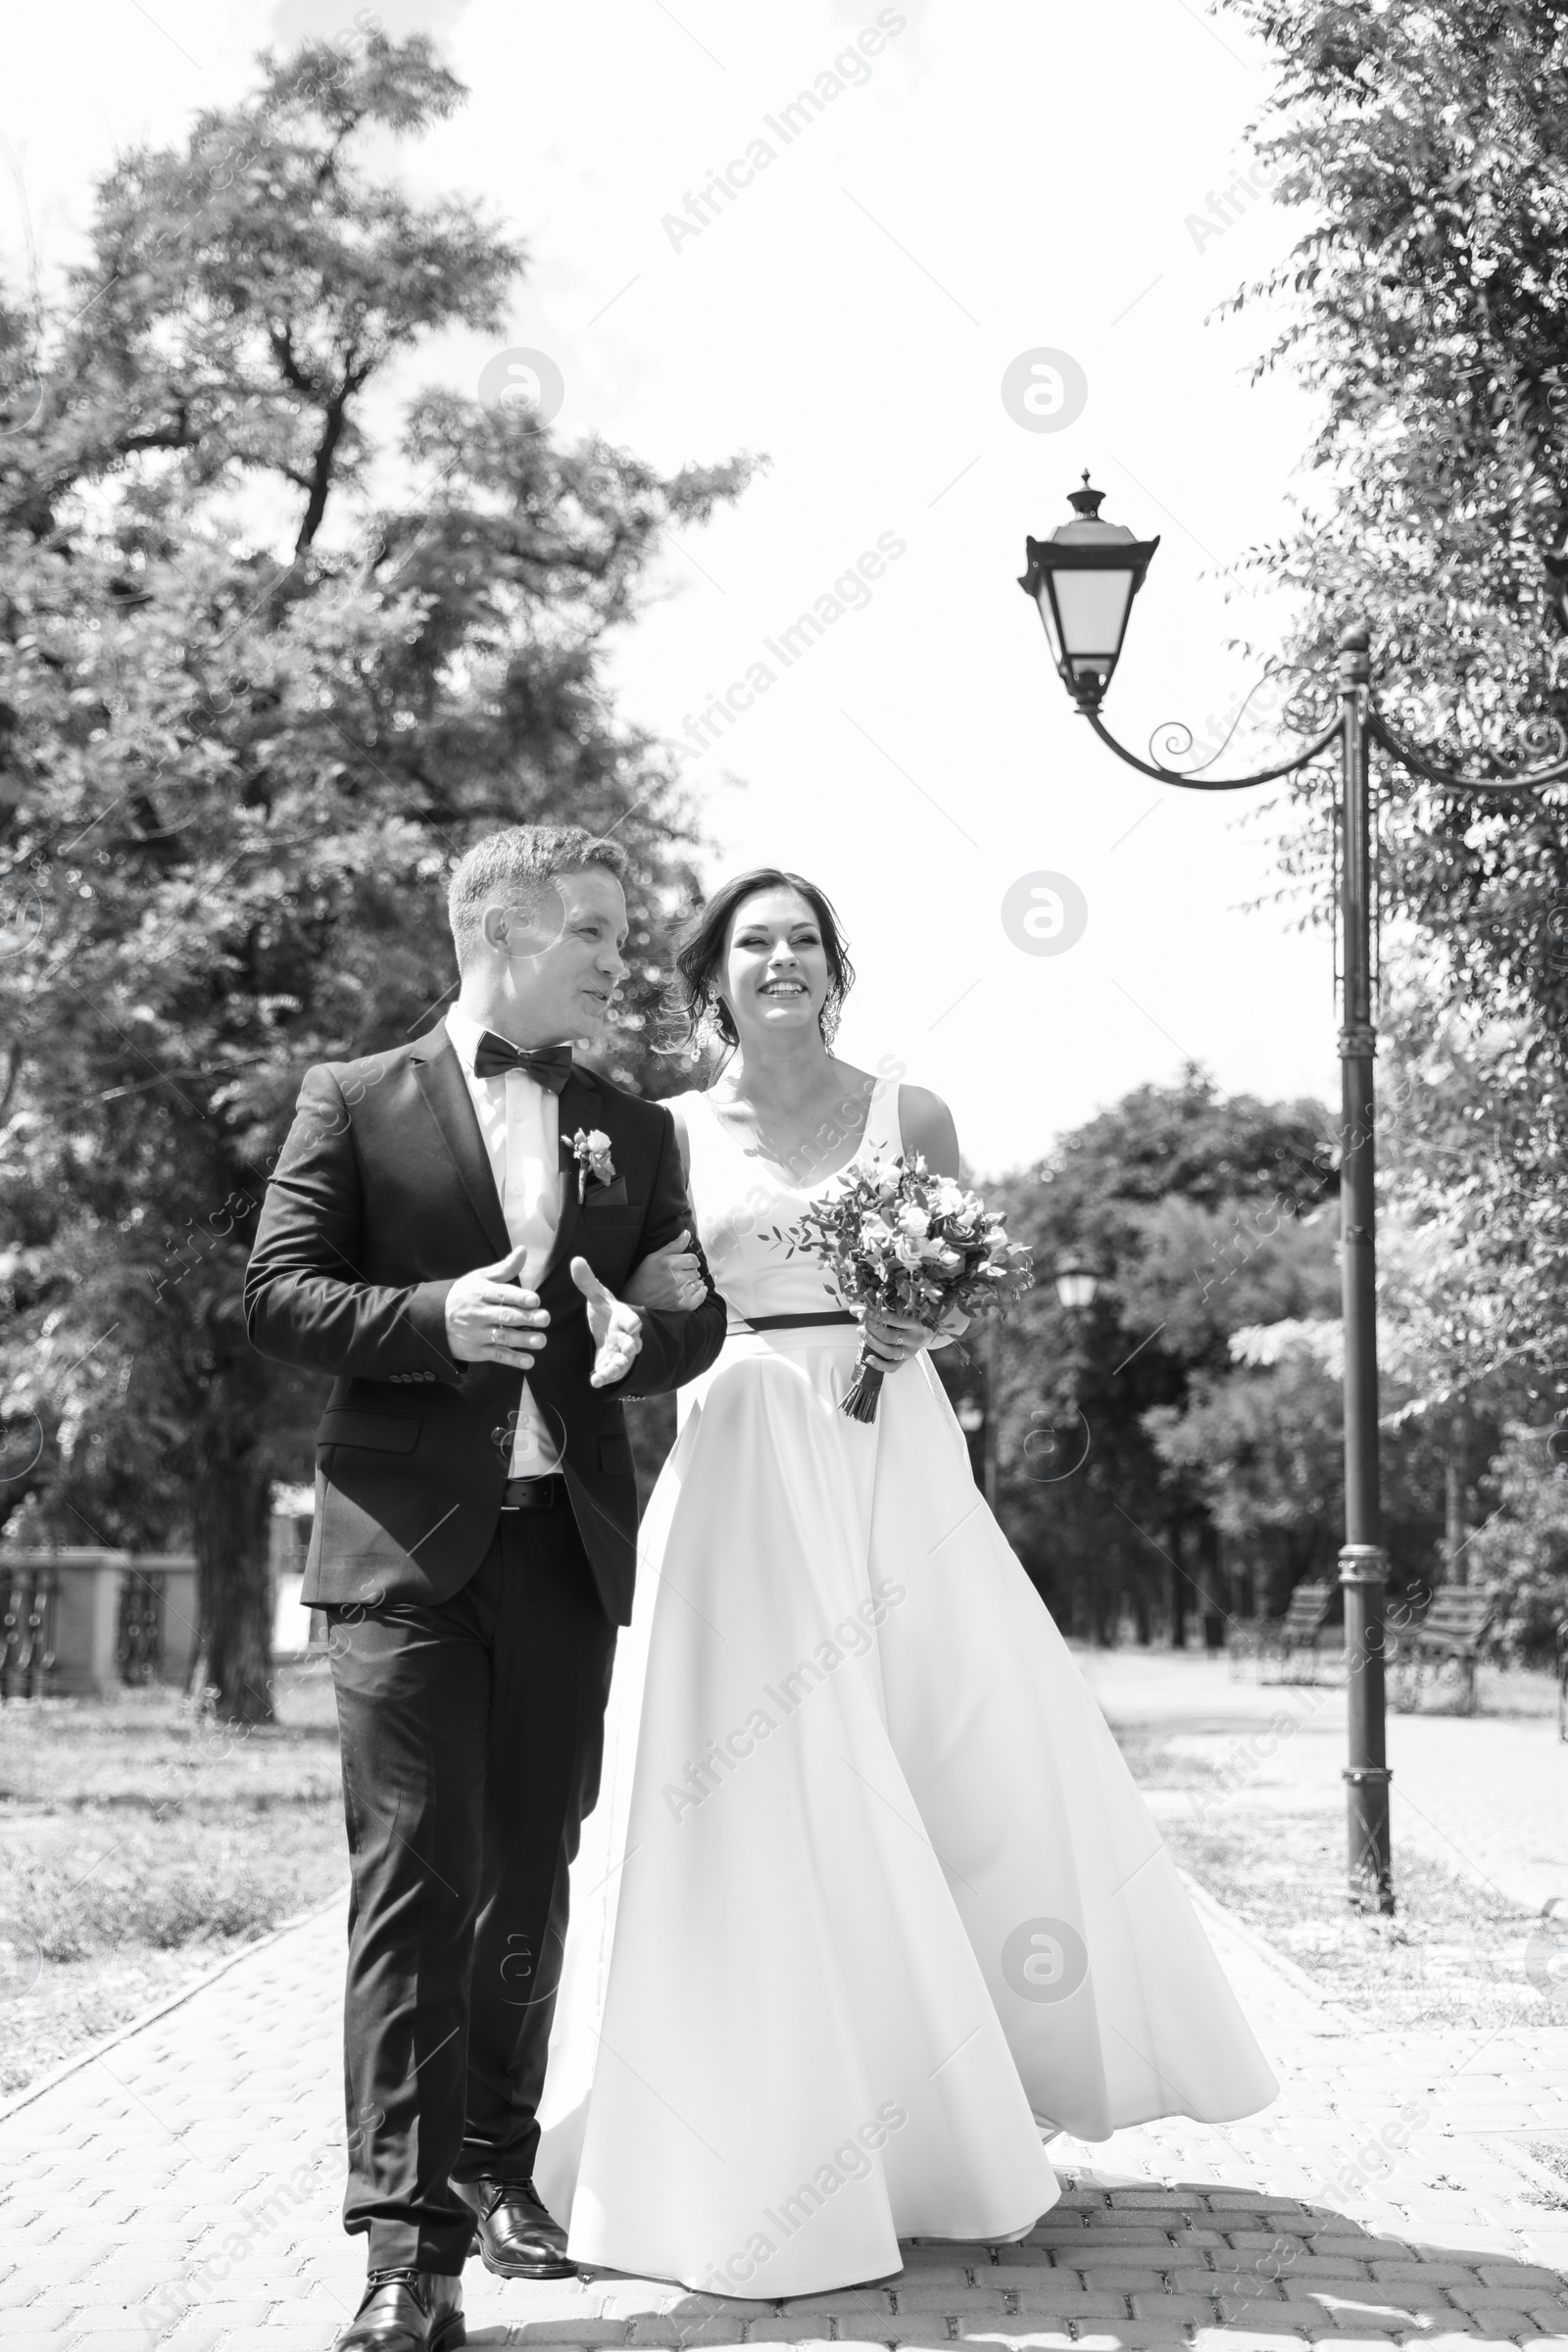 Photo of Happy newlyweds walking outdoors, black and white effect